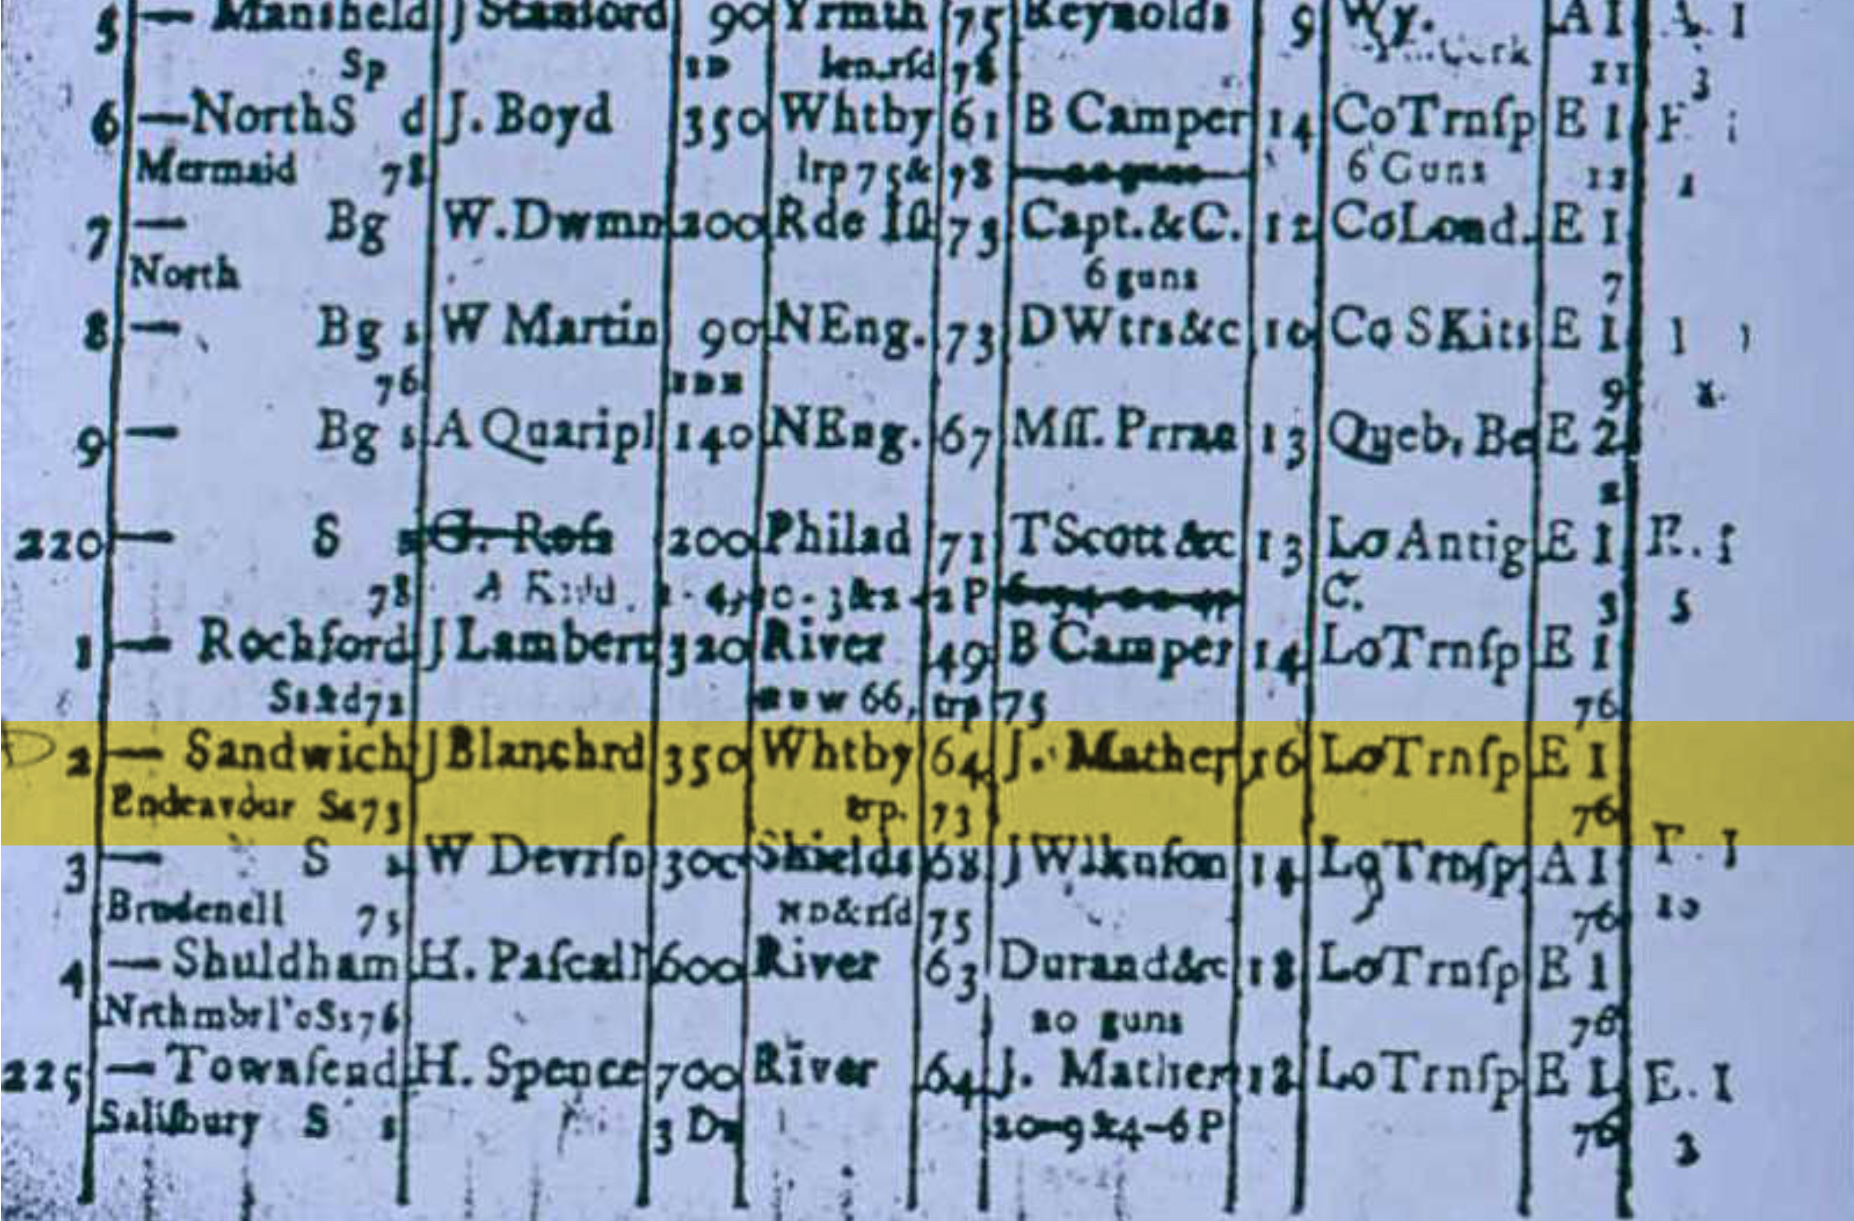 An extract from Lloyd's shipping register showing a line highlighted in yellow where The Lord Sandwich is noted as previously being The Endeavour from Whitby. 